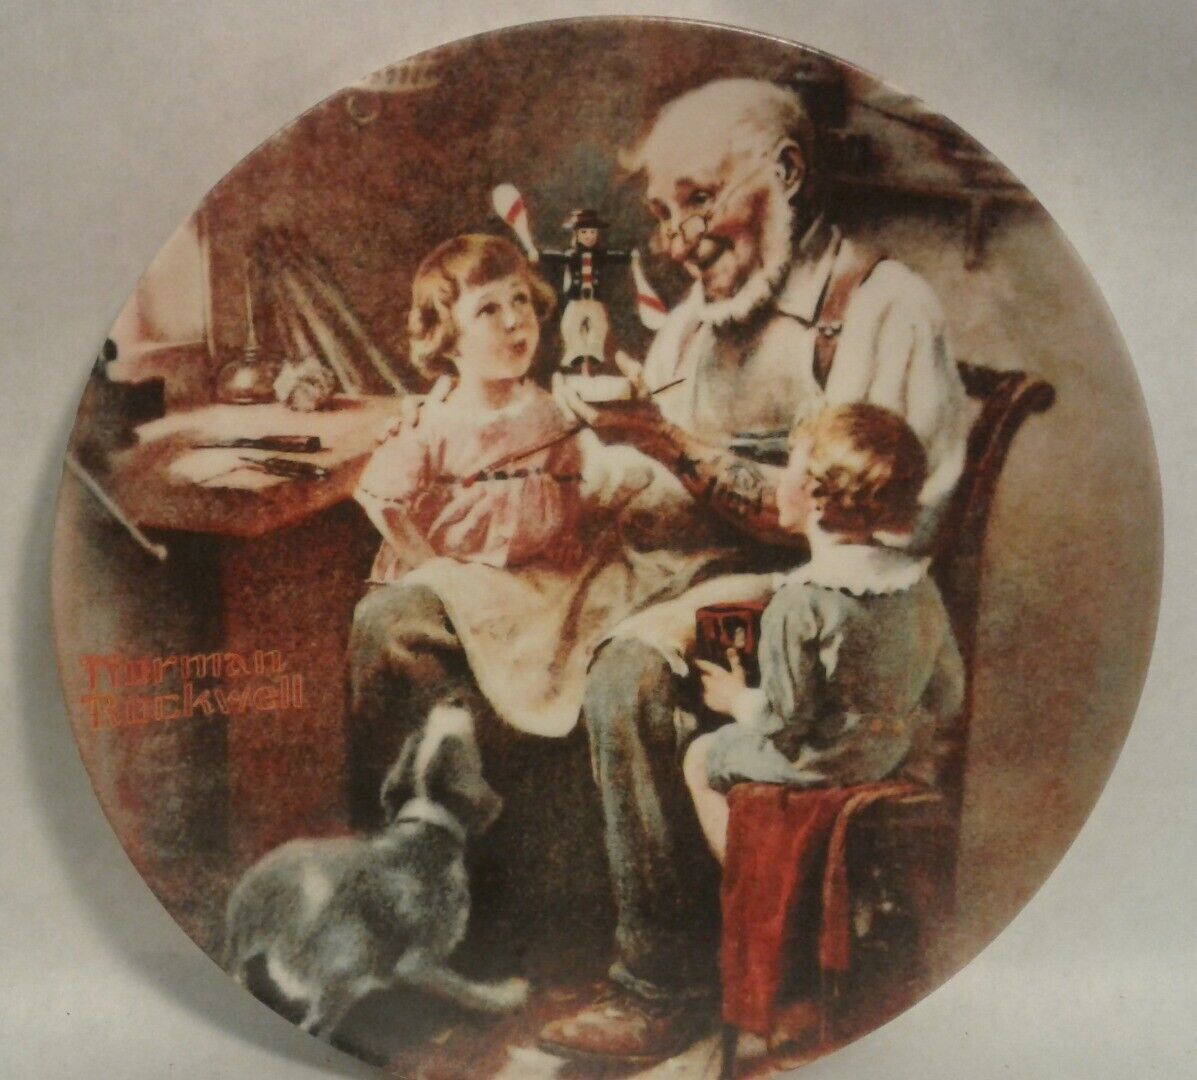 Vintage Norman Rockwell Bradford Exchange Plate 1977 1st Edition Toy Maker - $31.67